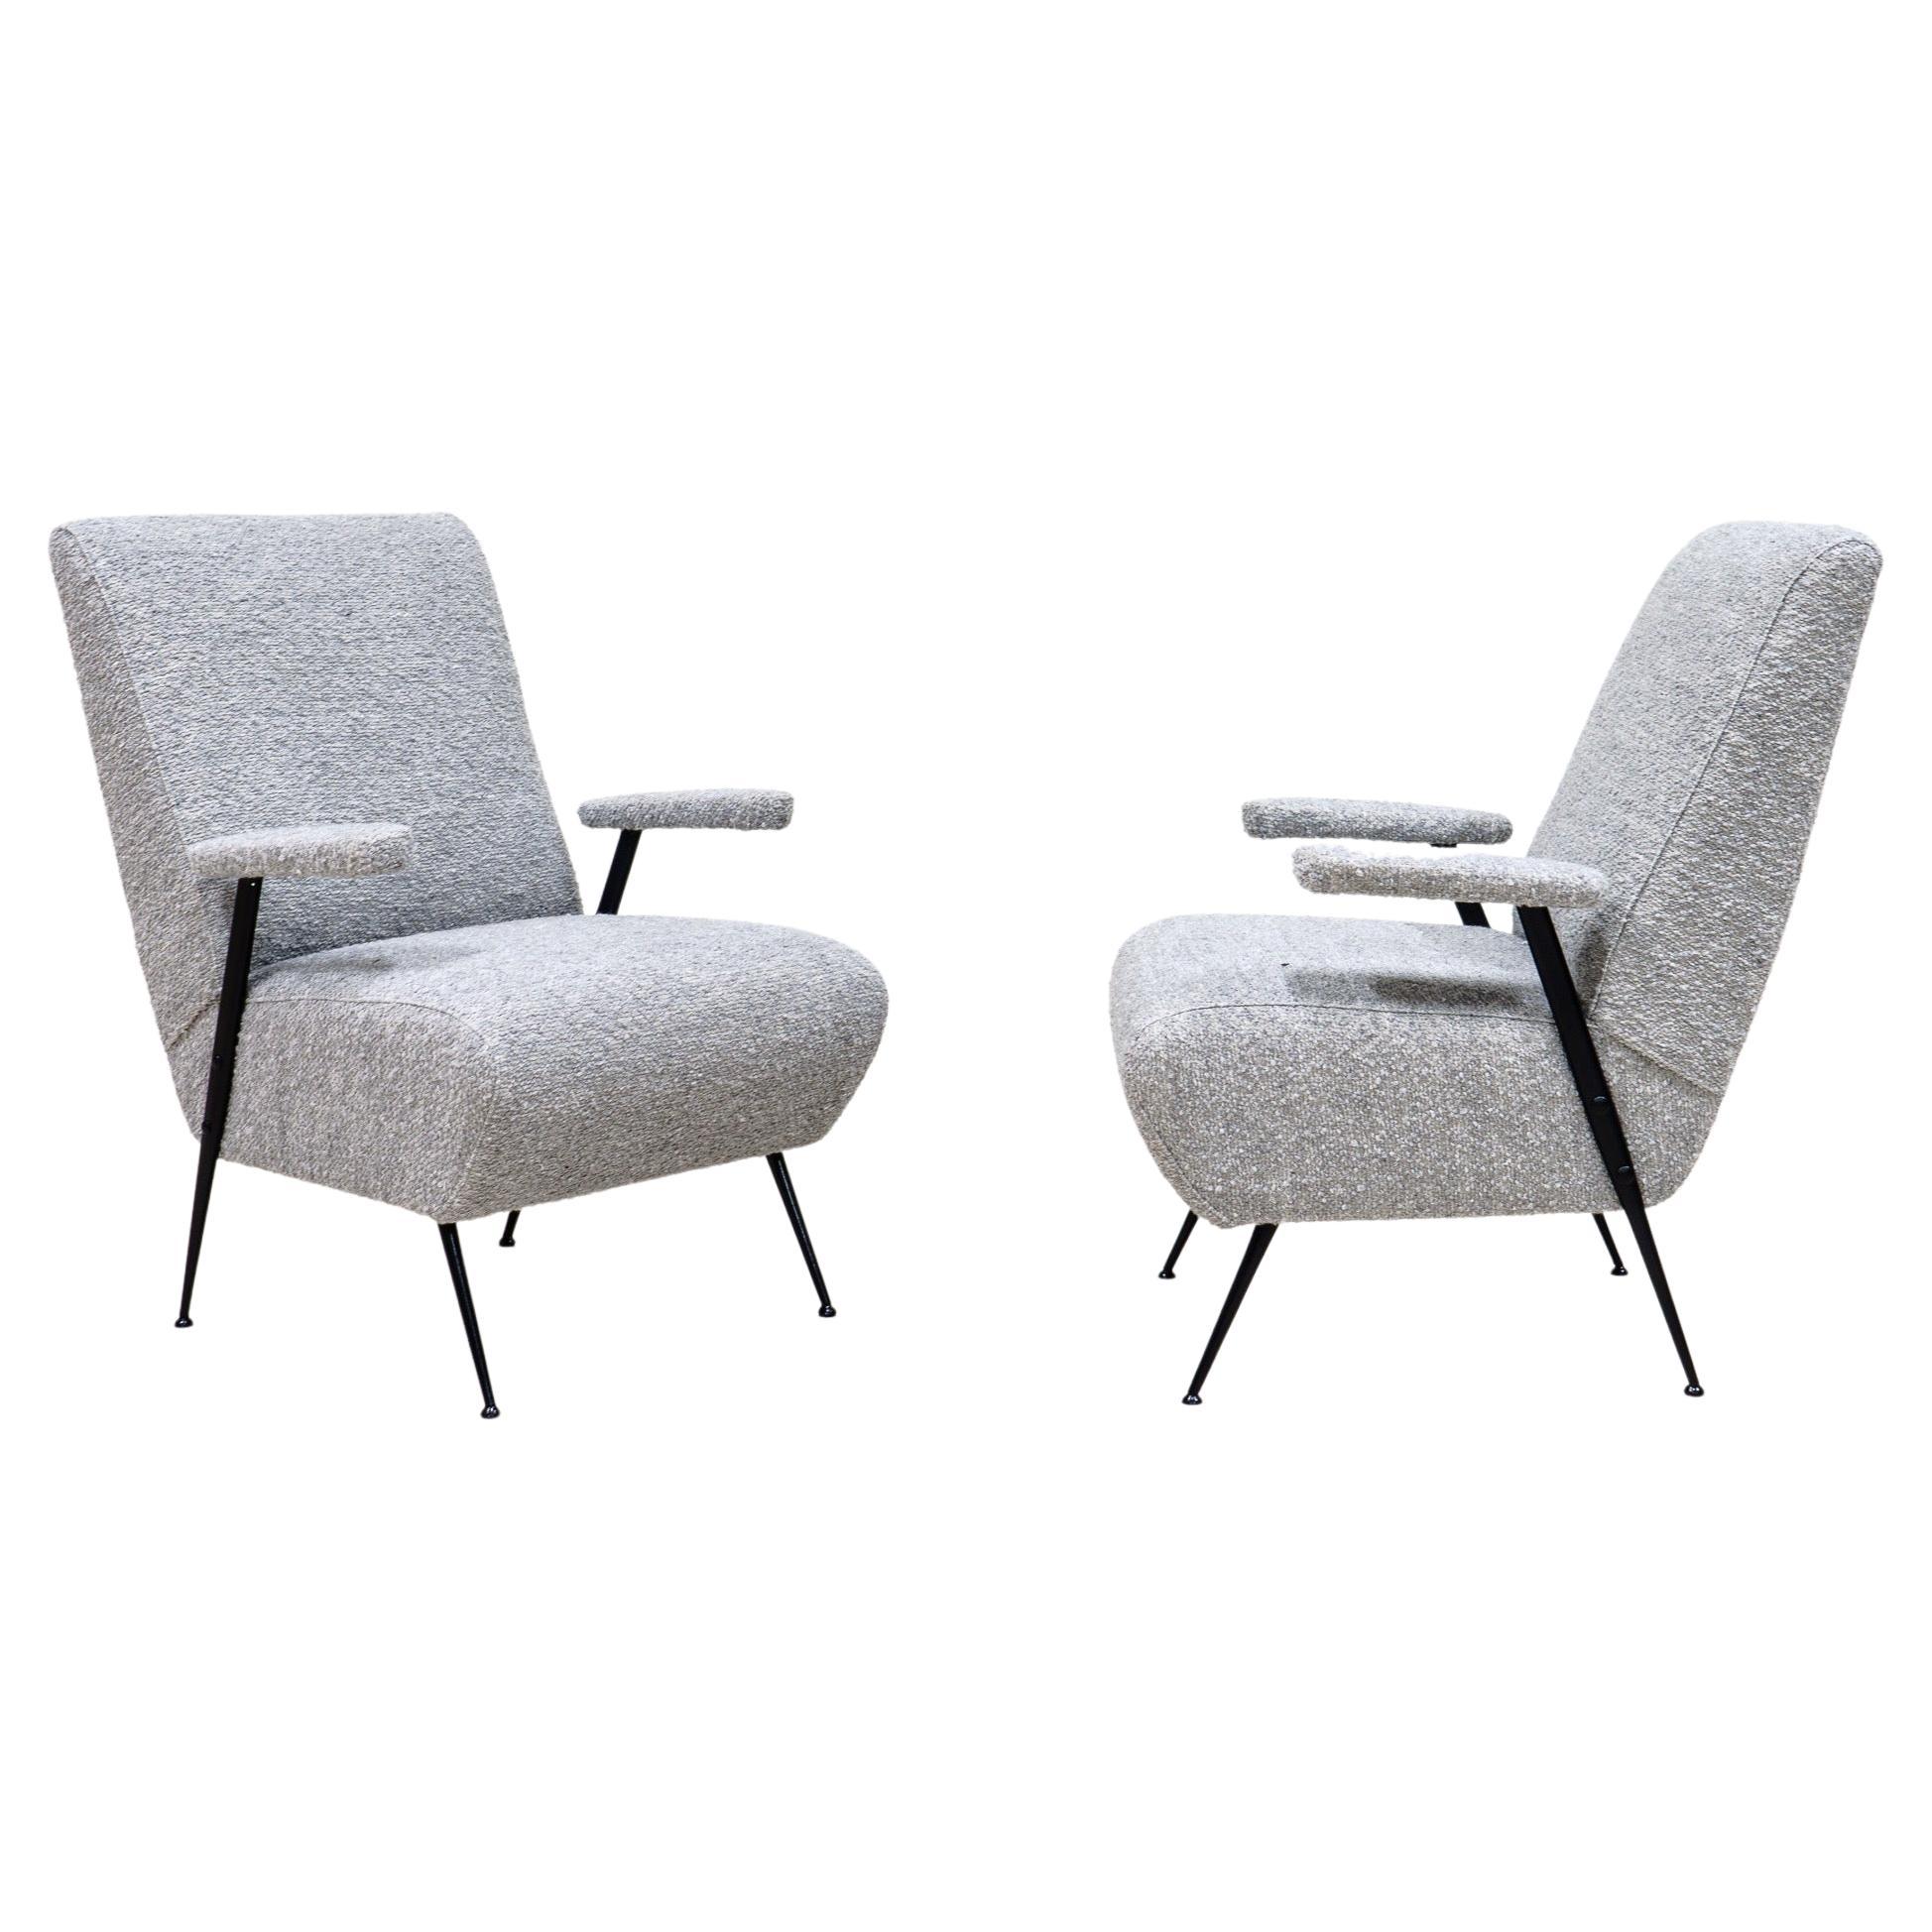 Pair of Armchairs in Grey Wool and Black Lacquered Metal Legs, Italy 50s For Sale